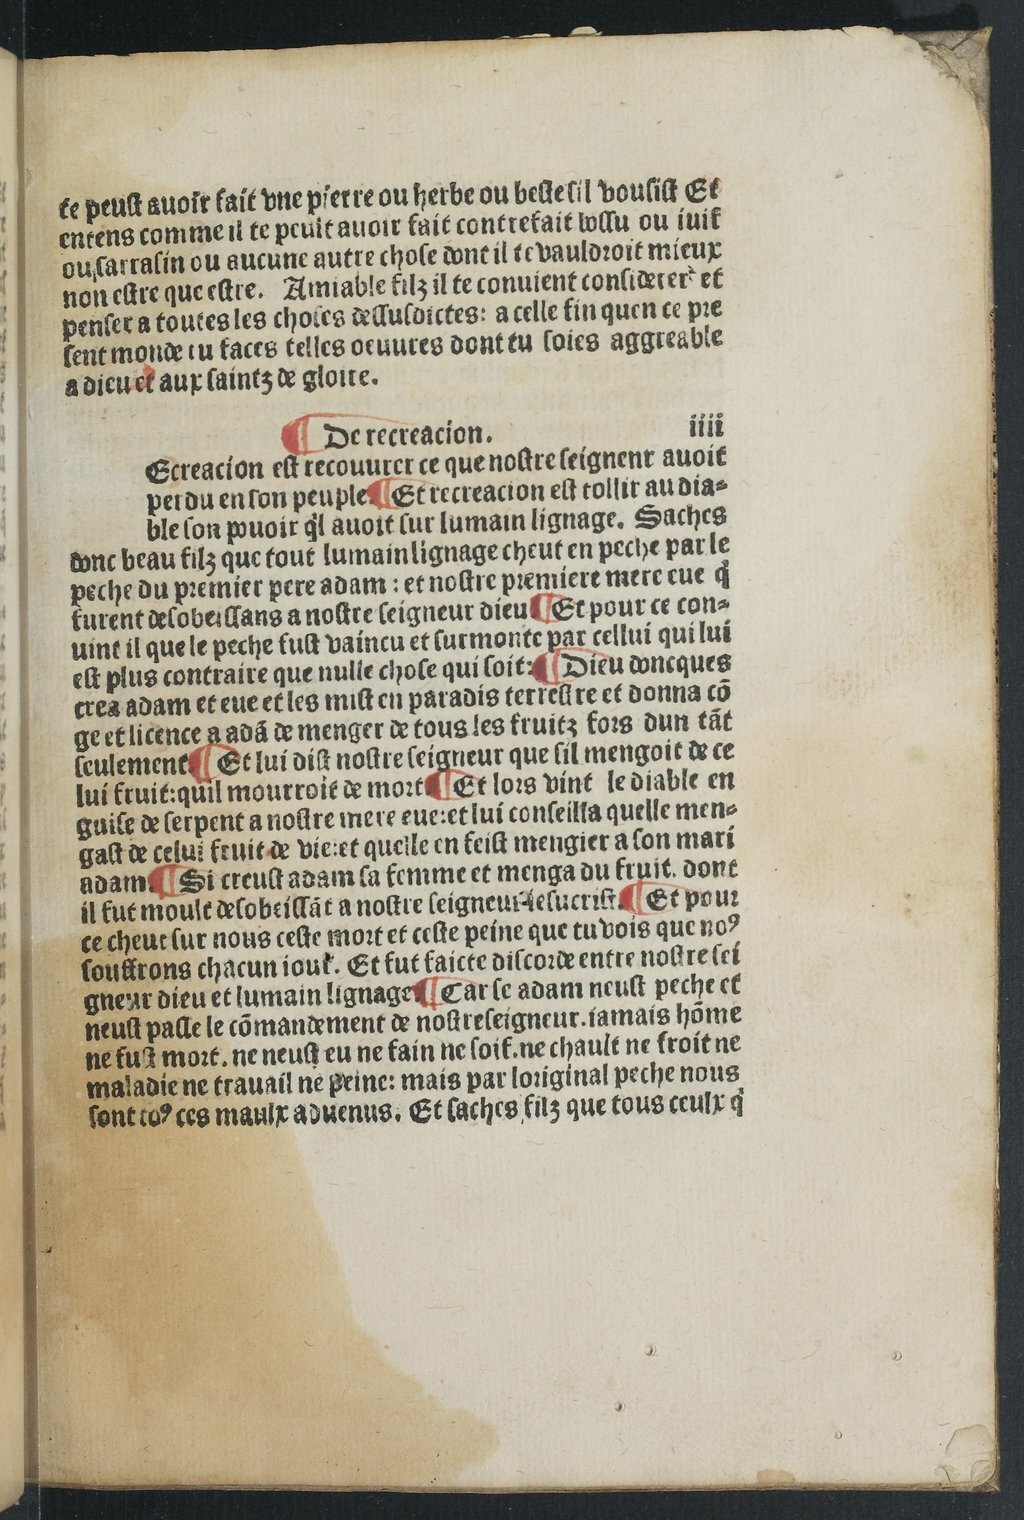 1482 [Antoine Caillaut] Trésor des humains BnF_Page_011.jpg